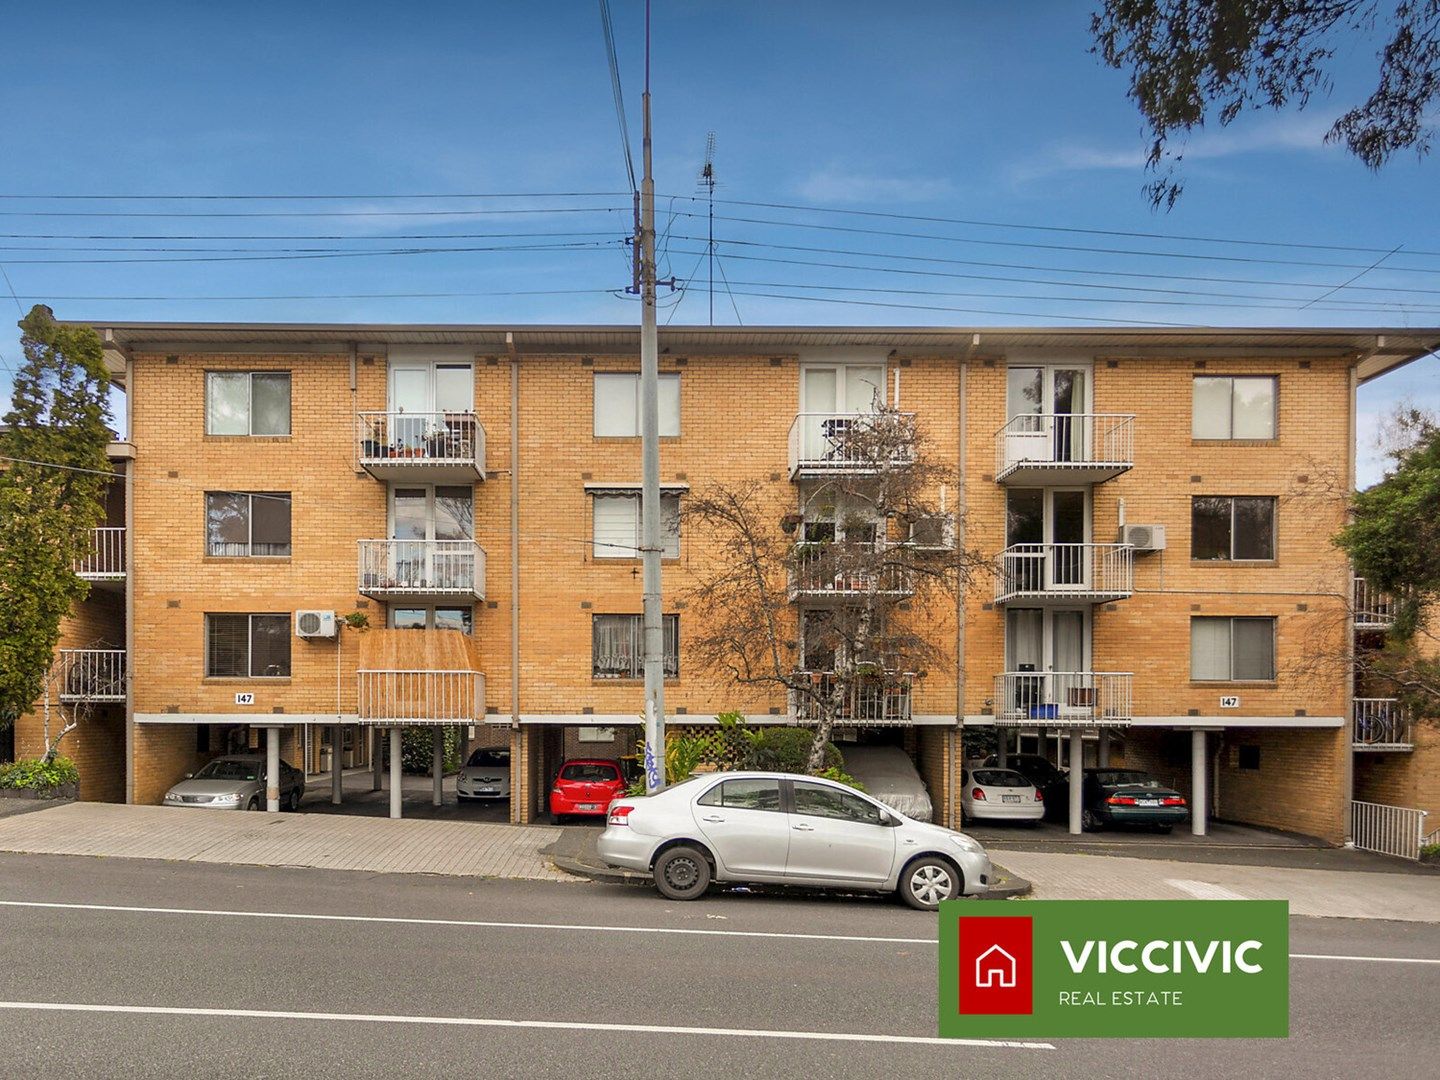 2 bedrooms Apartment / Unit / Flat in 1/147 Curzon Street NORTH MELBOURNE VIC, 3051